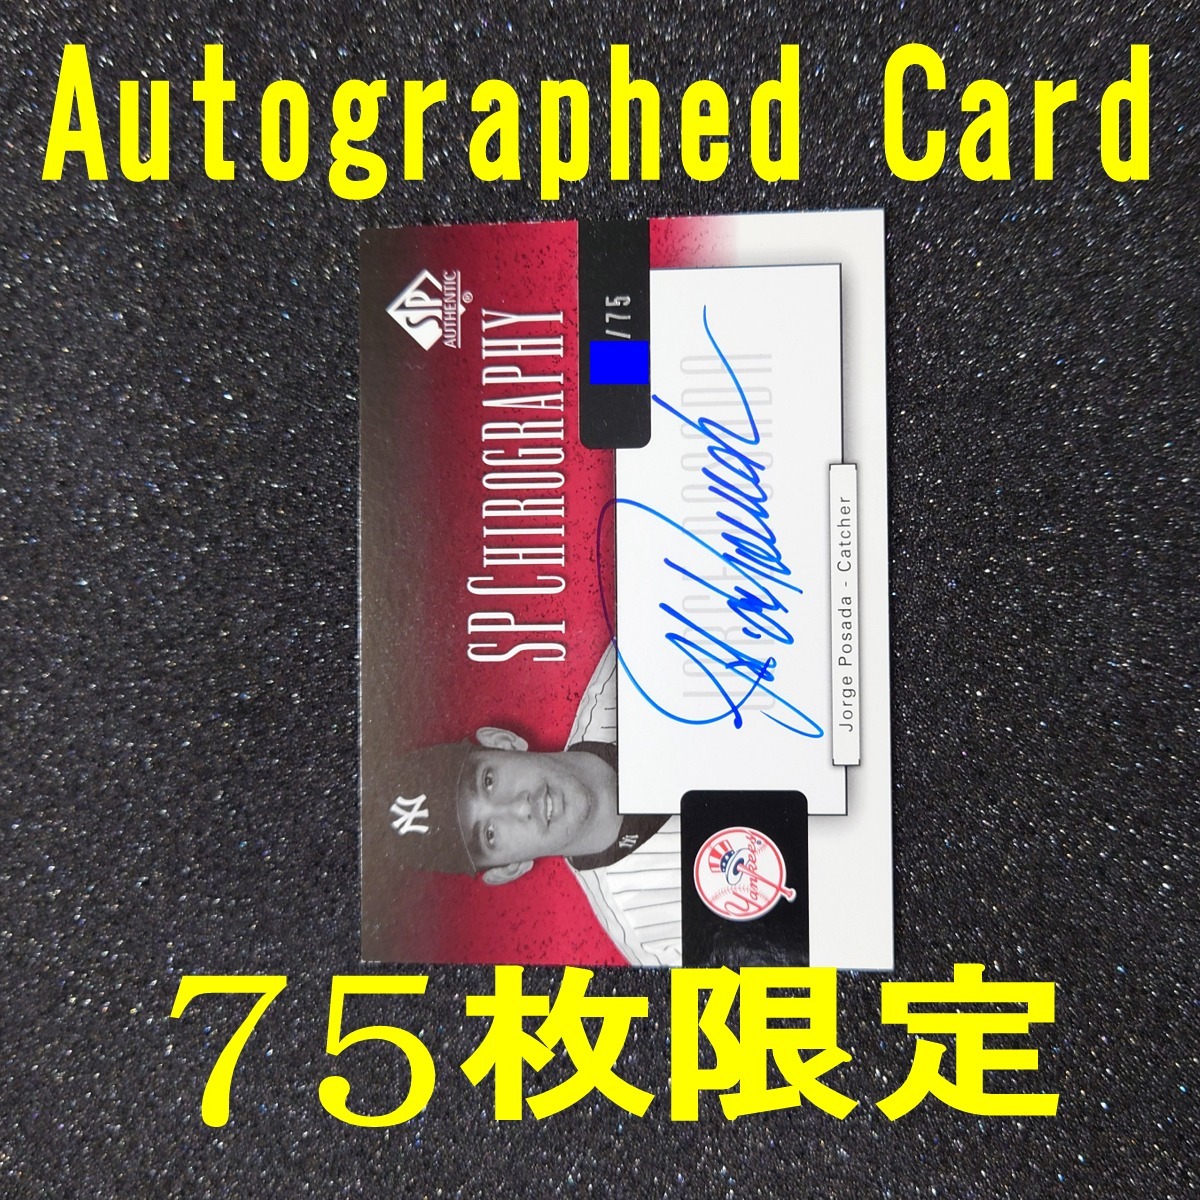 ◆【Auto Card】Jorge Posada 2004 UD SP Authentic SP Chirography Autographed card　◇検索：ホルヘ・ポサダ 直筆サイン Yankees